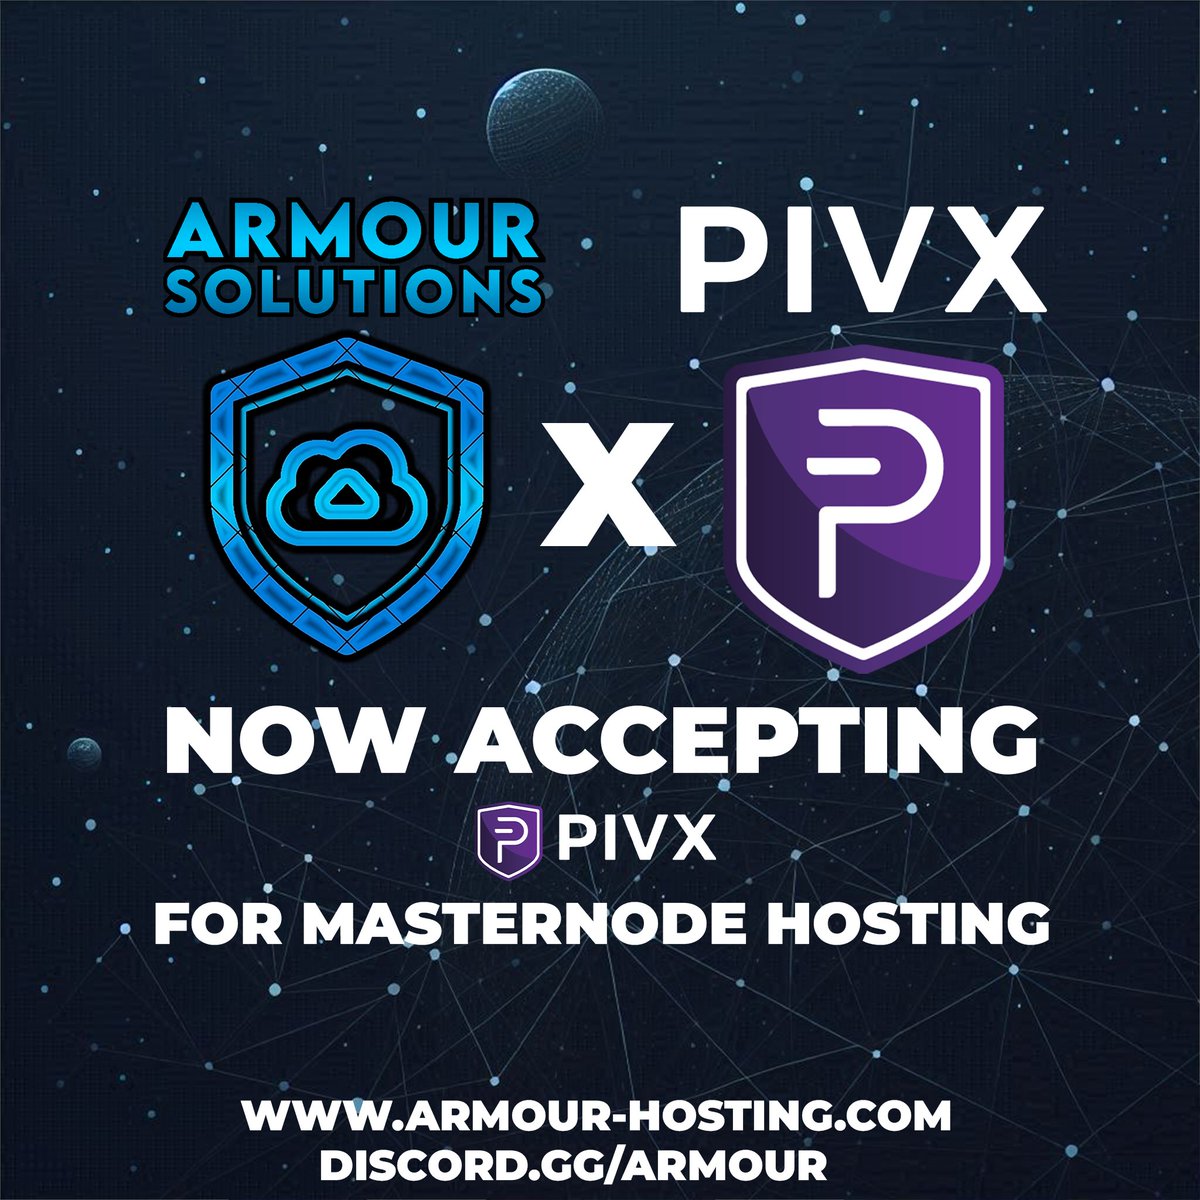 Armour Solutions are now accepting $PIVX as a payment for all of our products!  

Purchase and setup your #PIVX #Masternode today using the discount code 'PIVX' and you will receive up to 20% off!  

Currently we support self-hosting, with specialised PIVX packages coming soon!